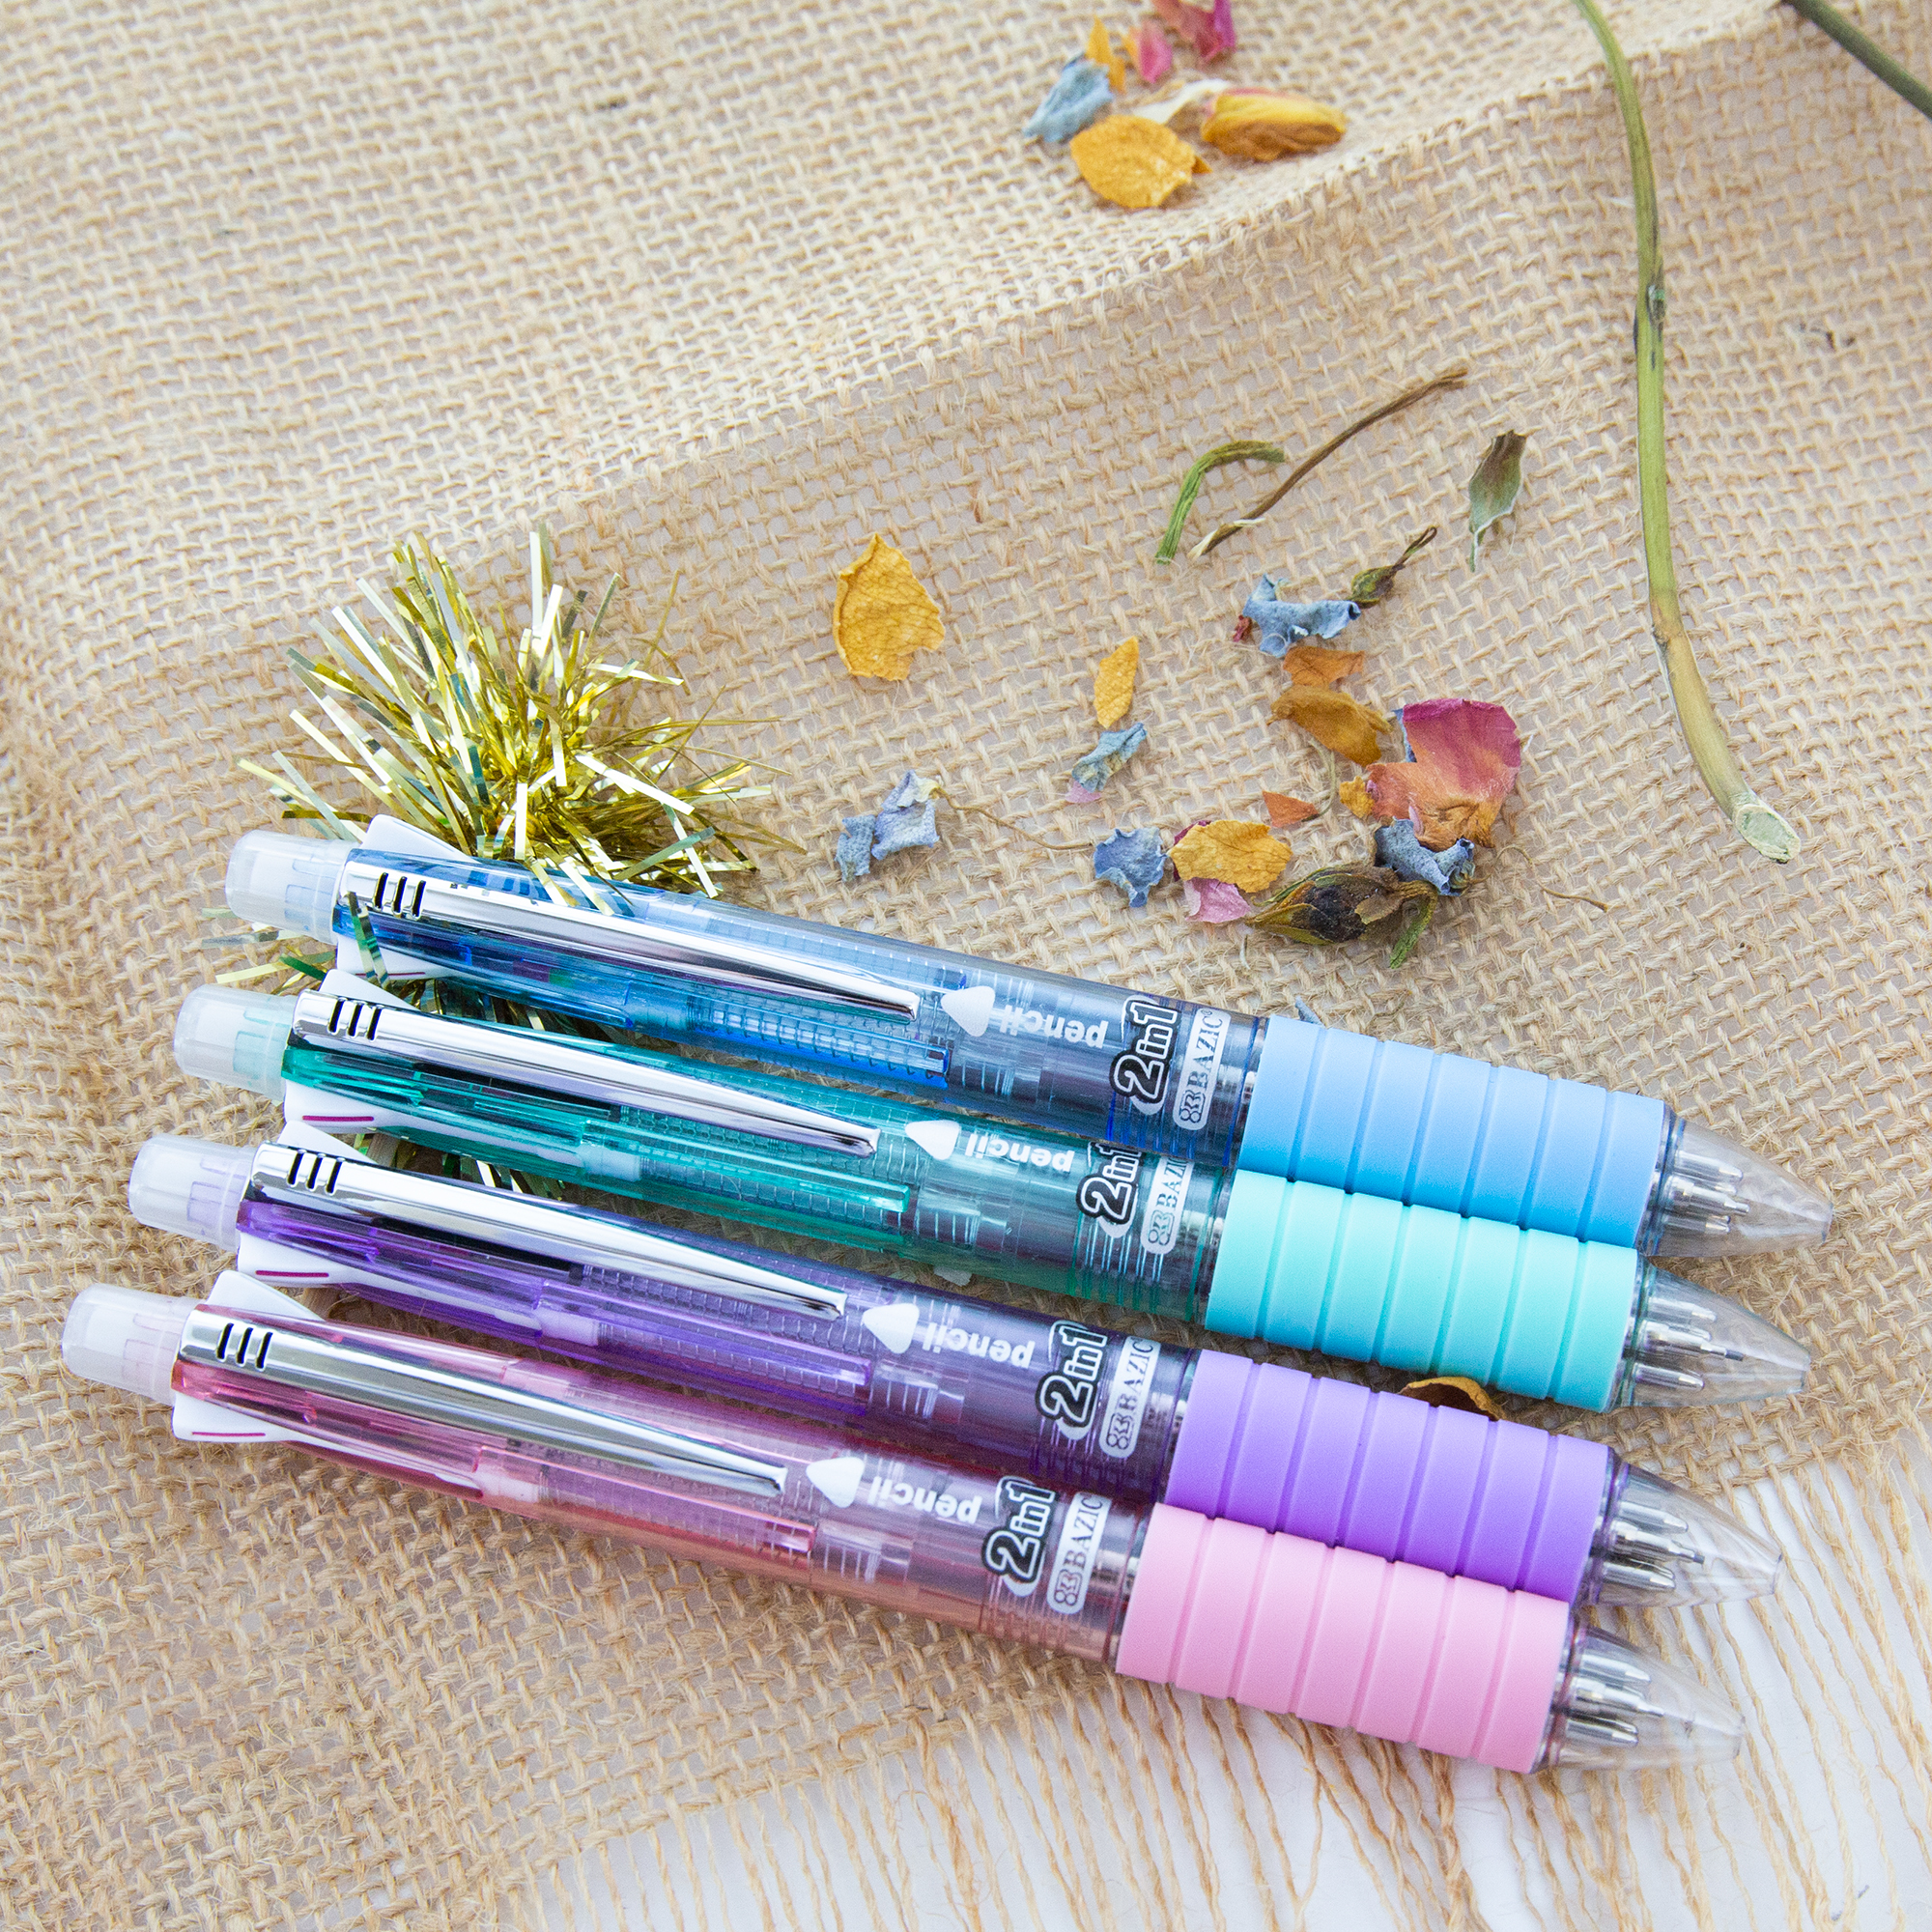 BAZIC 2-In-1 Mechanical Pencil & 4-Color Pen w/ Grip Bazic Products